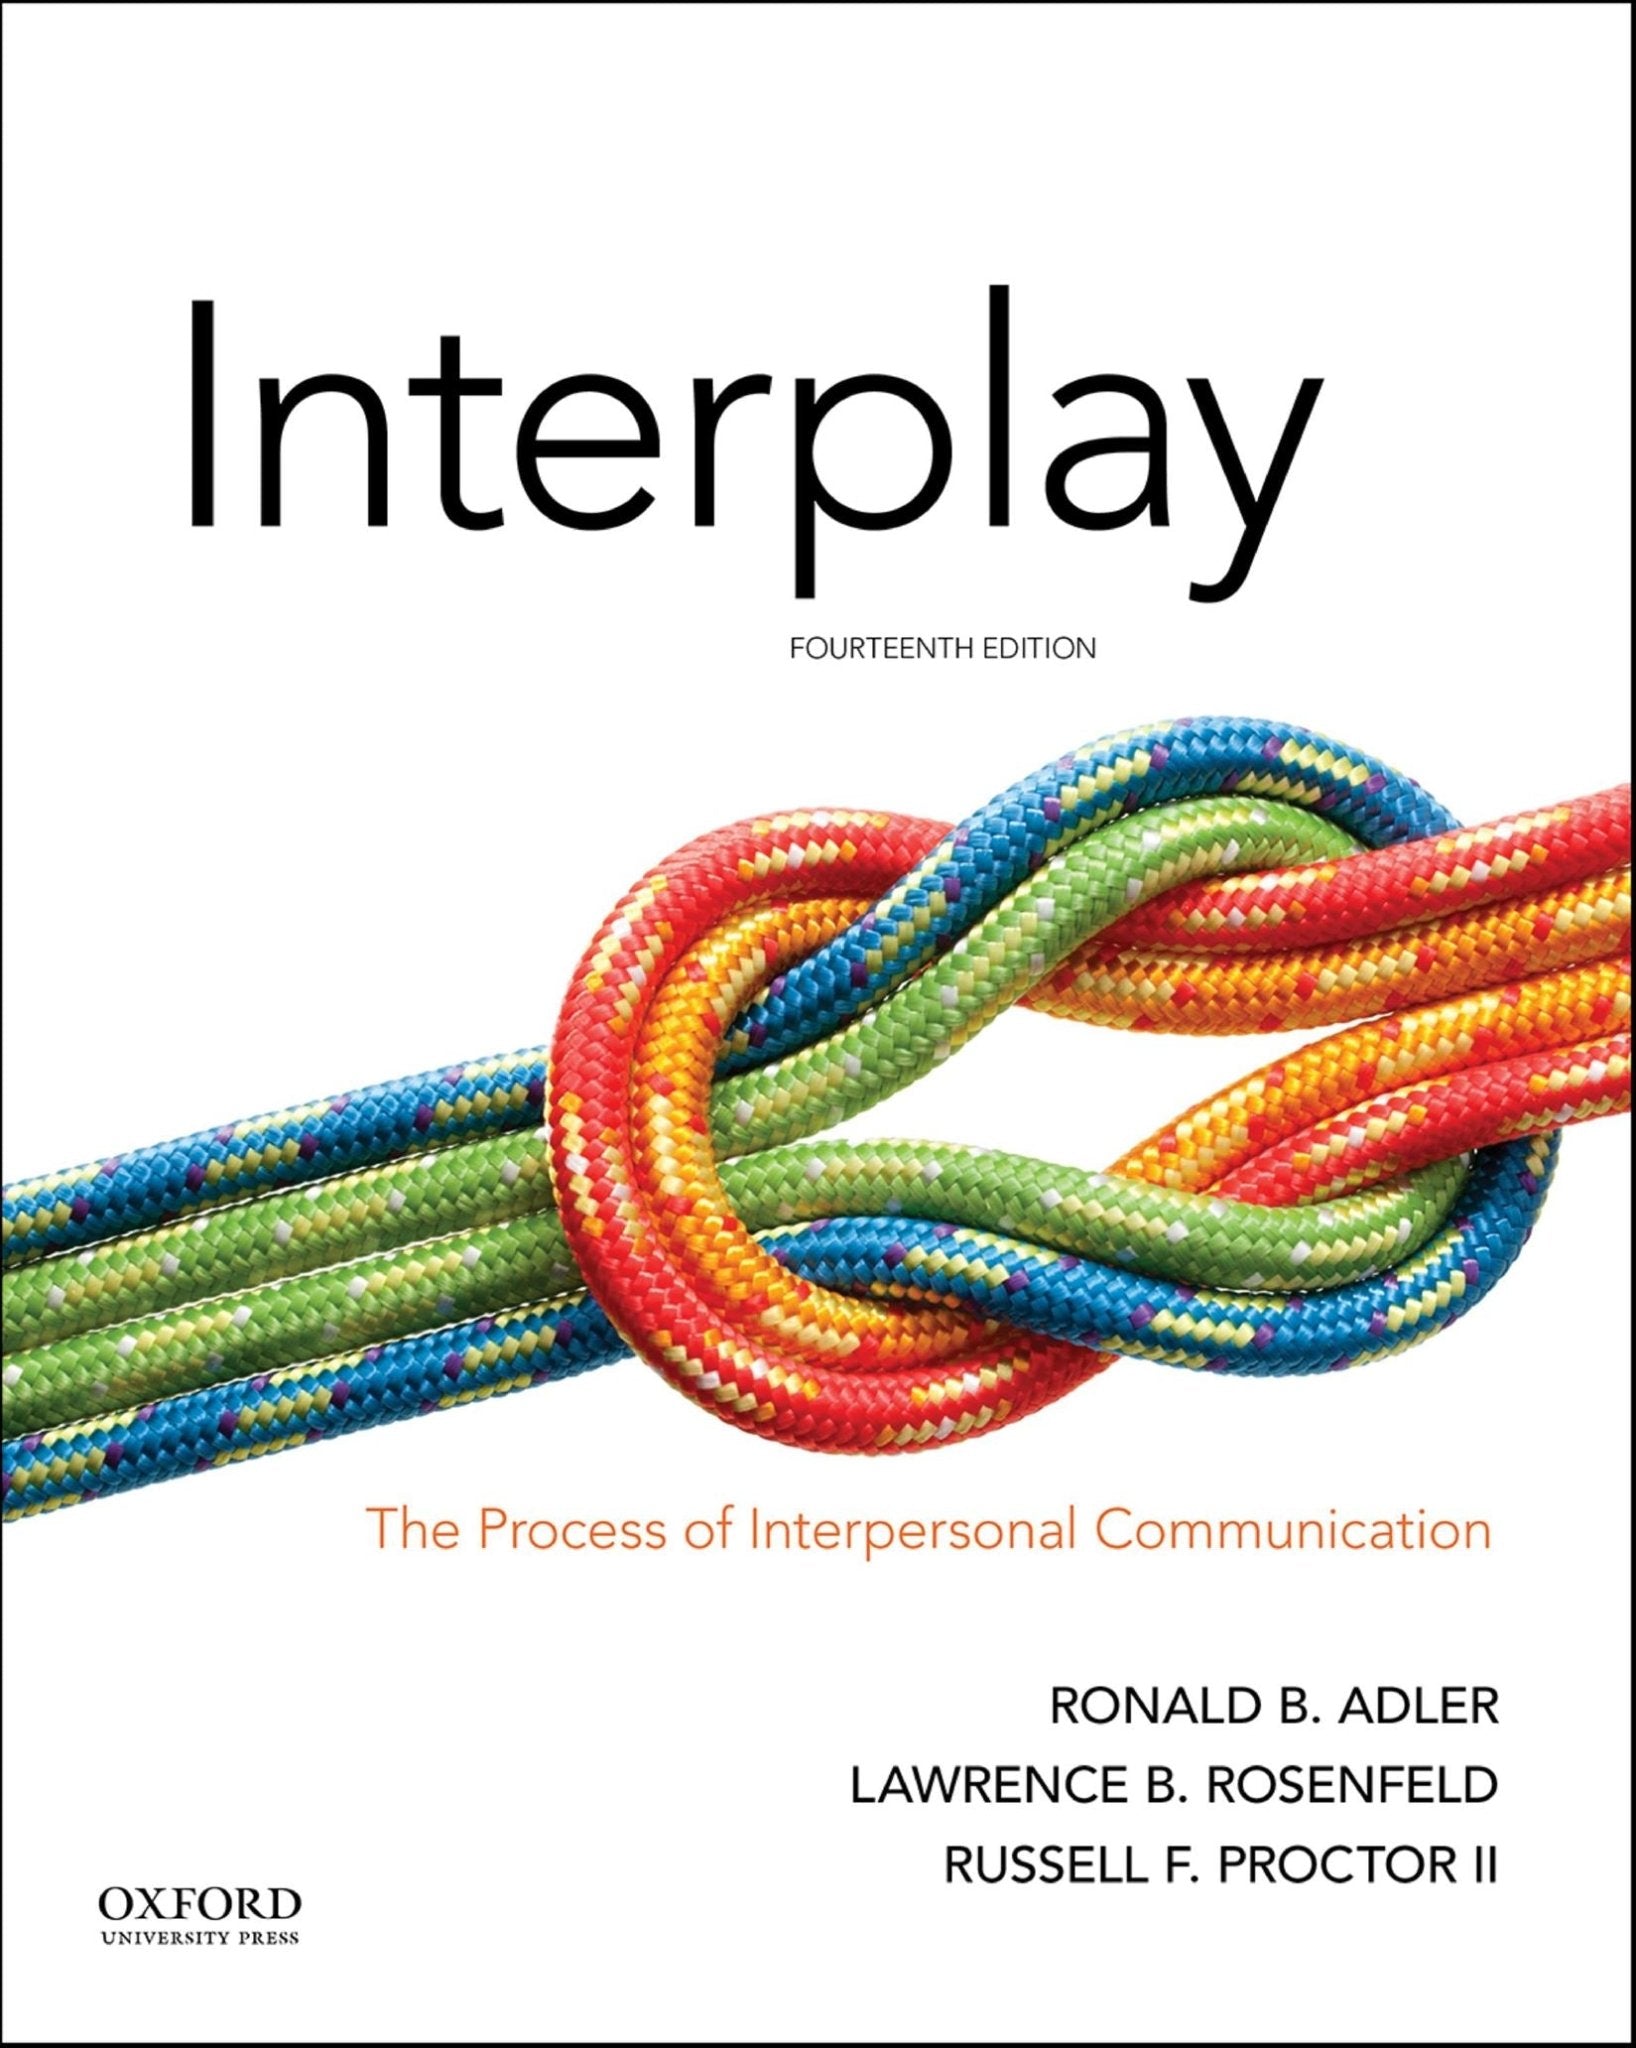 Interplay the process of interpersonal communication UPDATED 14th edition - Instant Download 2 PDF's